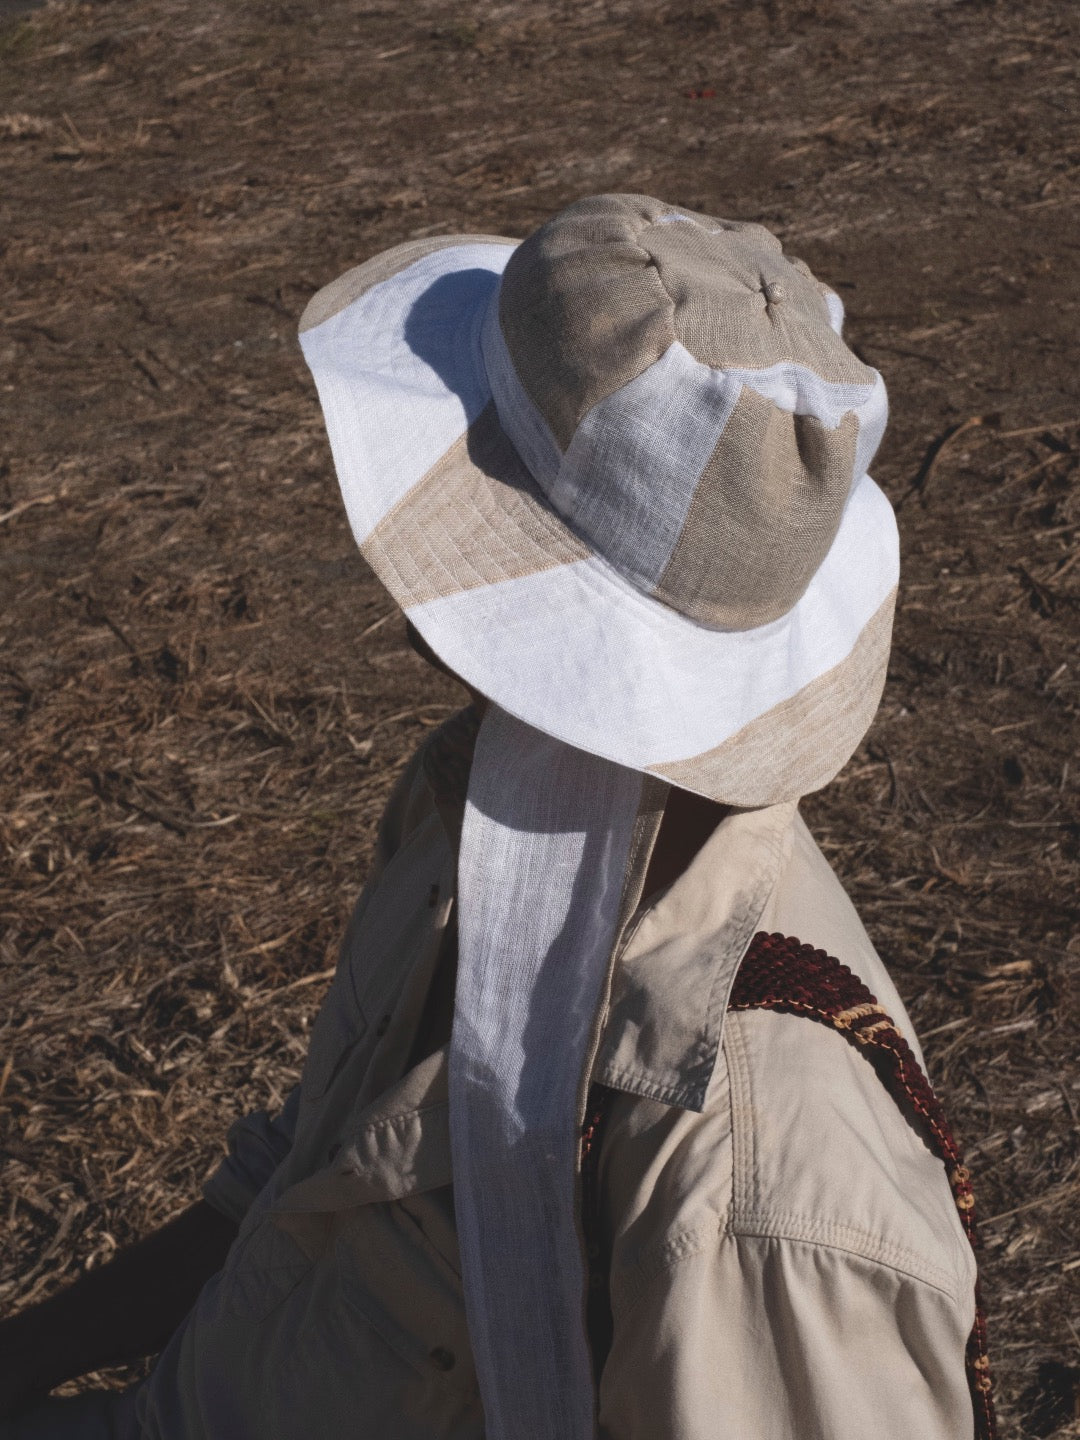 A man in a Companion hat, an essential summer staple, sitting in a field.